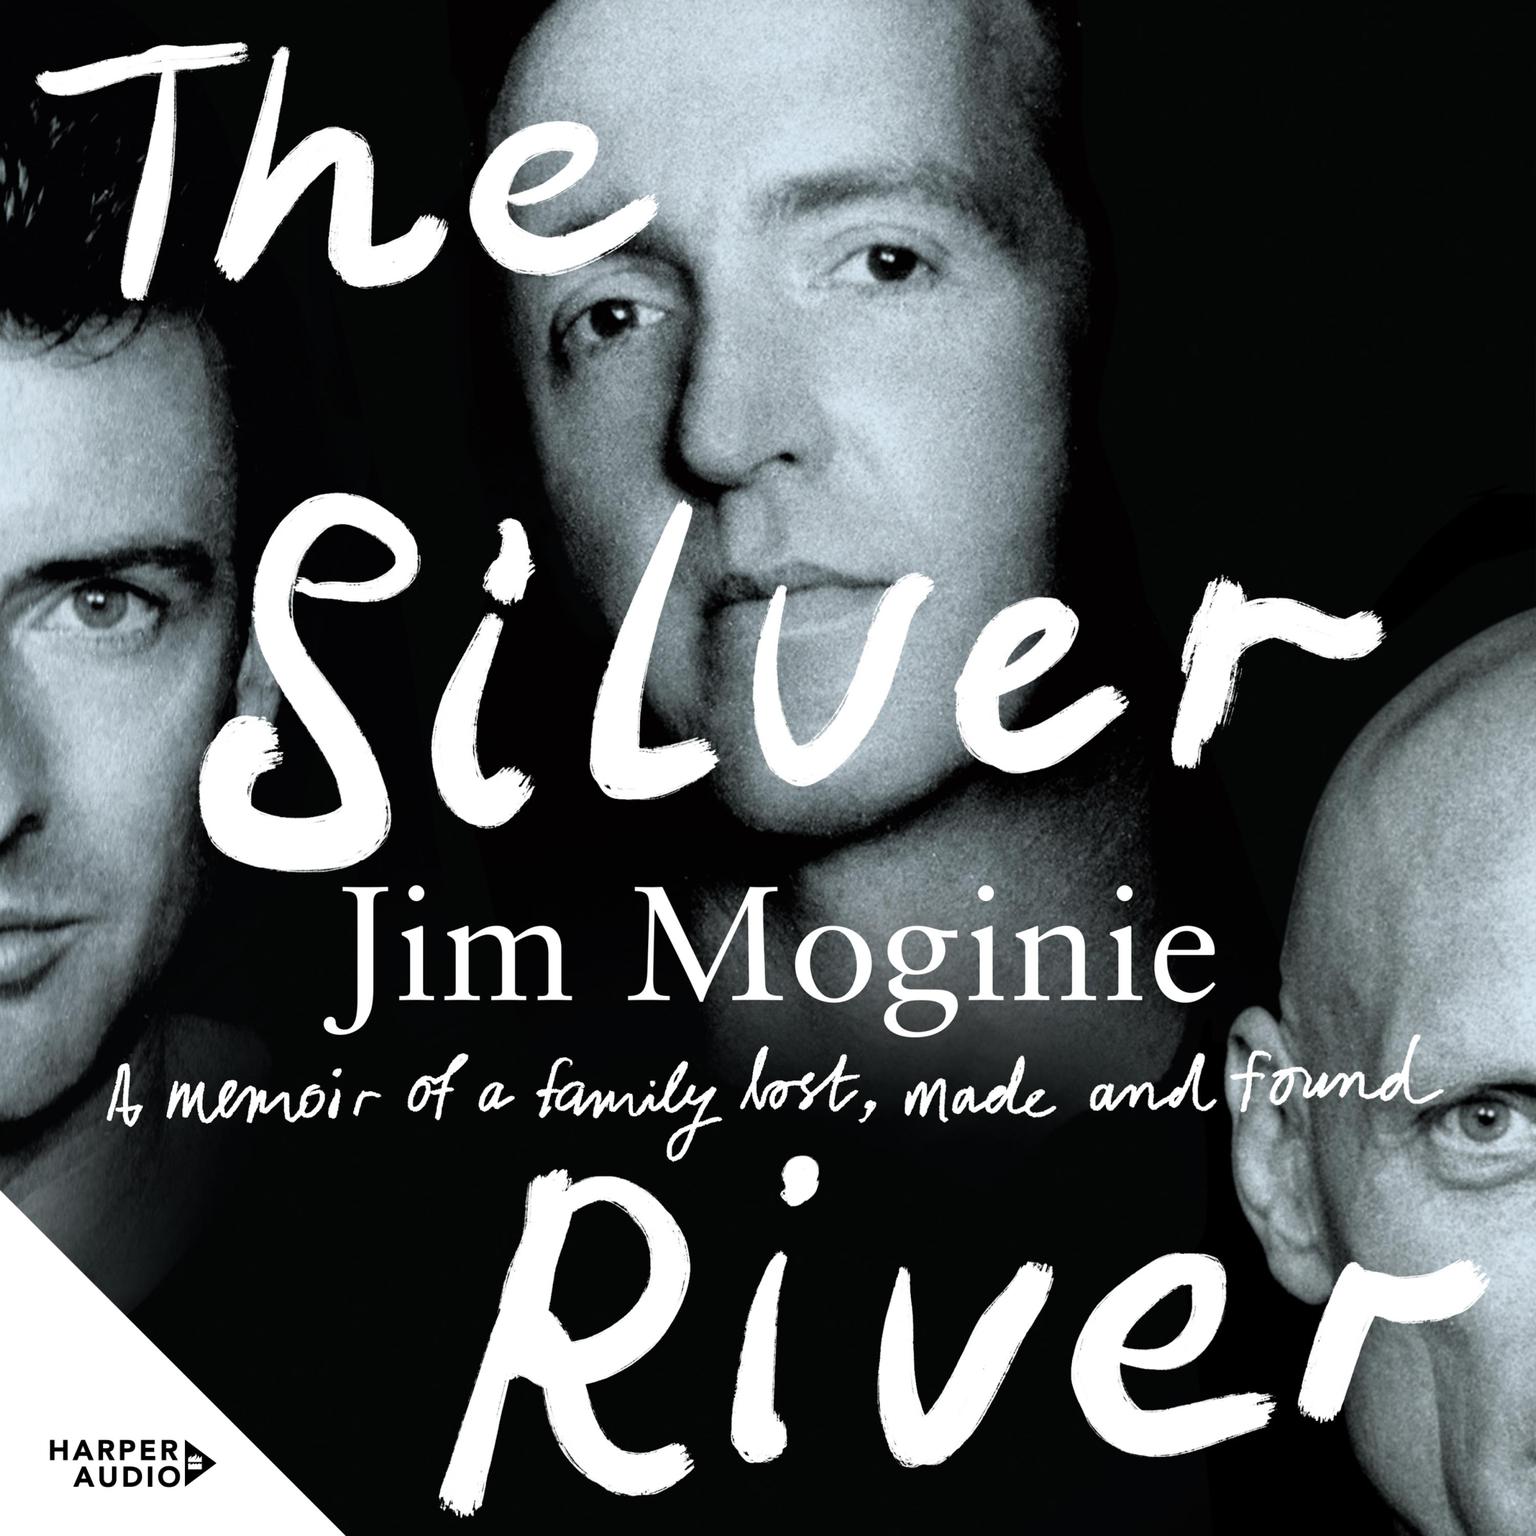 The Silver River: A memoir of family - lost, made and found - from the Midnight Oil founding member, for readers of Dave Grohl, Tim Rogers and Rick Rubin Audiobook, by Jim Moginie